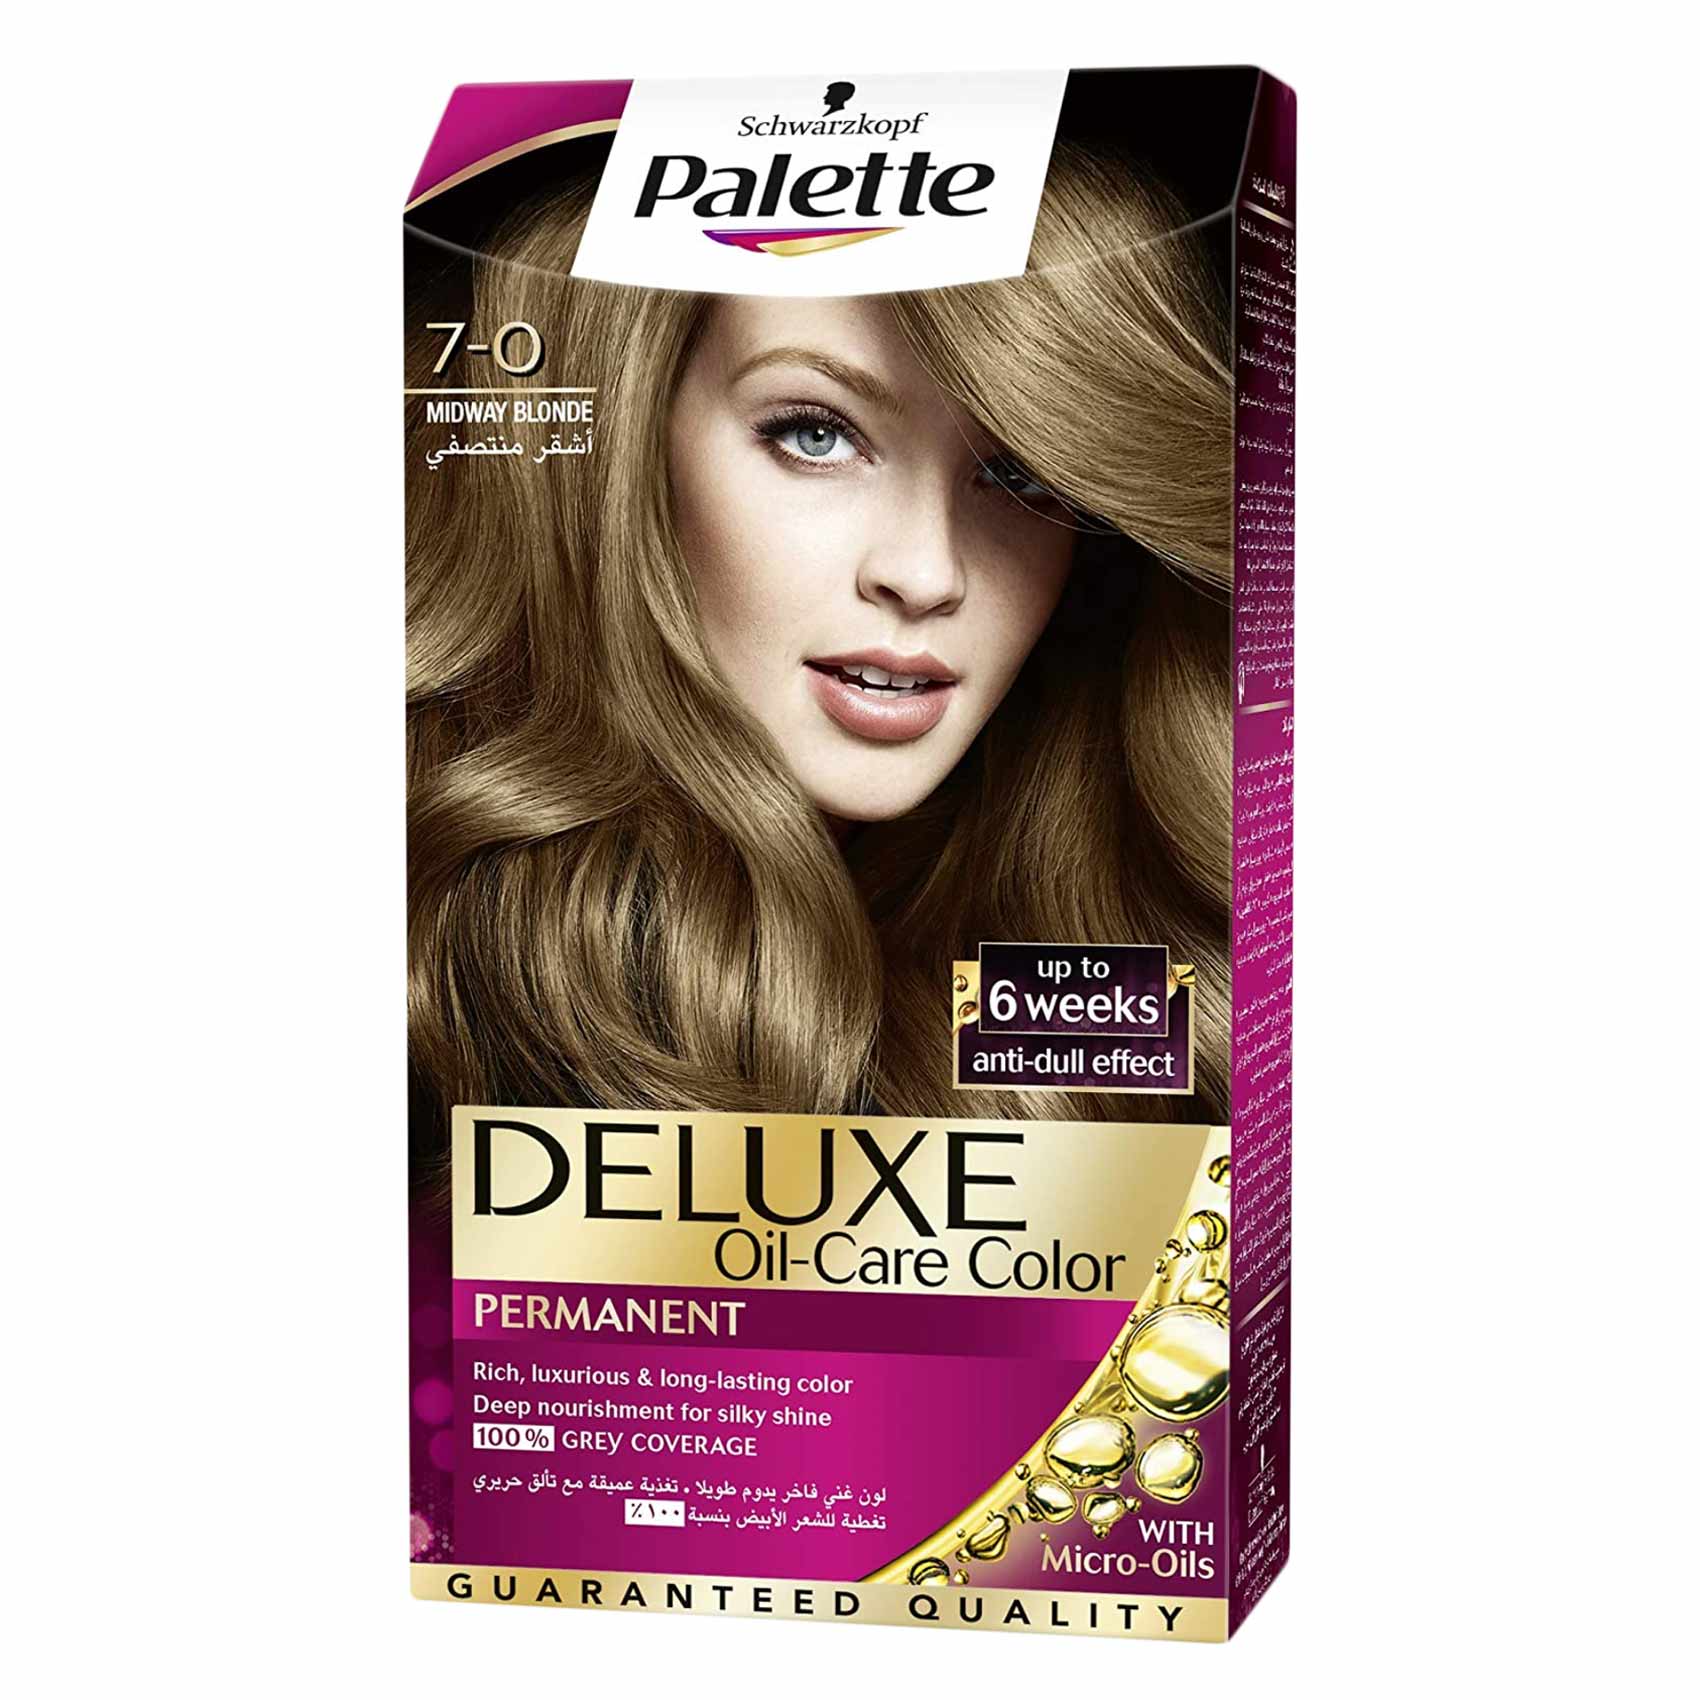 Schwarzkopf Palette Deluxe Oil Care Permanent Hair Color 7-0 Midway Blonde 50ml